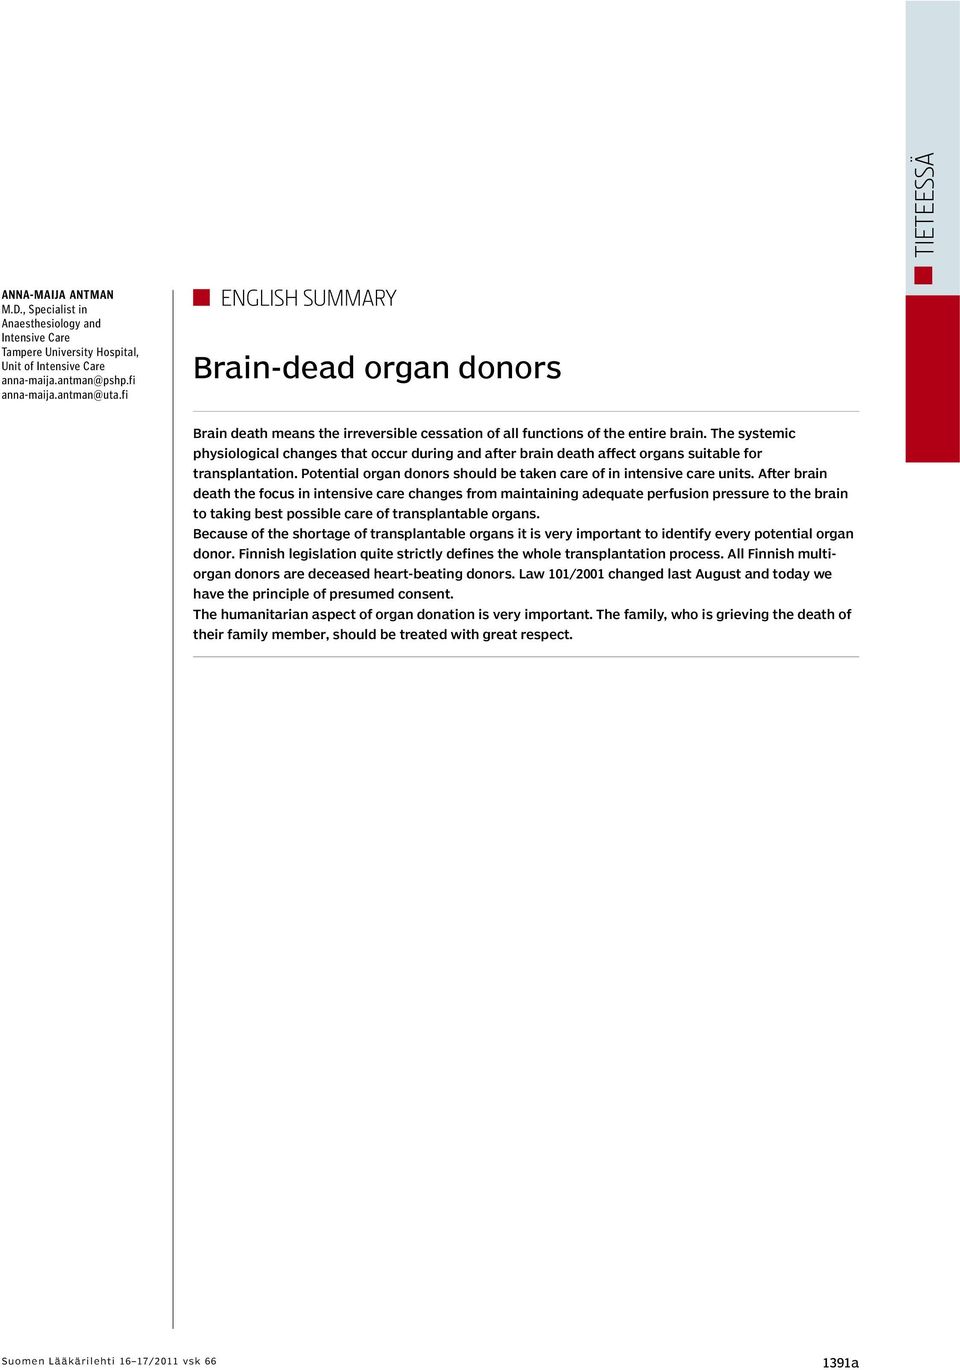 The systemic physiological changes that occur during and after brain death affect organs suitable for transplantation. Potential organ donors should be taken care of in intensive care units.